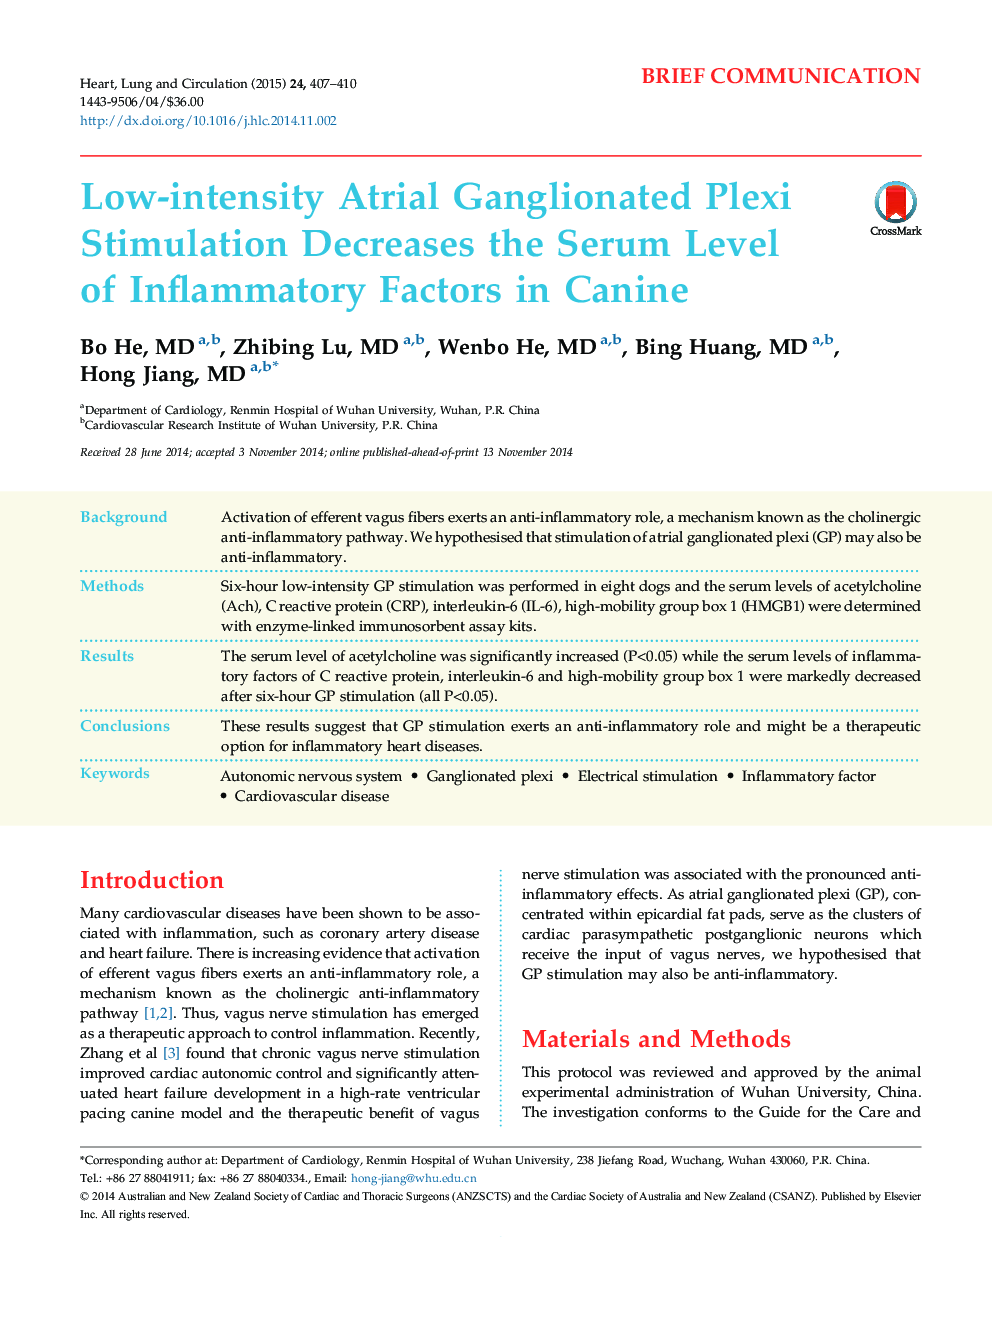 Low-intensity Atrial Ganglionated Plexi Stimulation Decreases the Serum Level of Inflammatory Factors in Canine